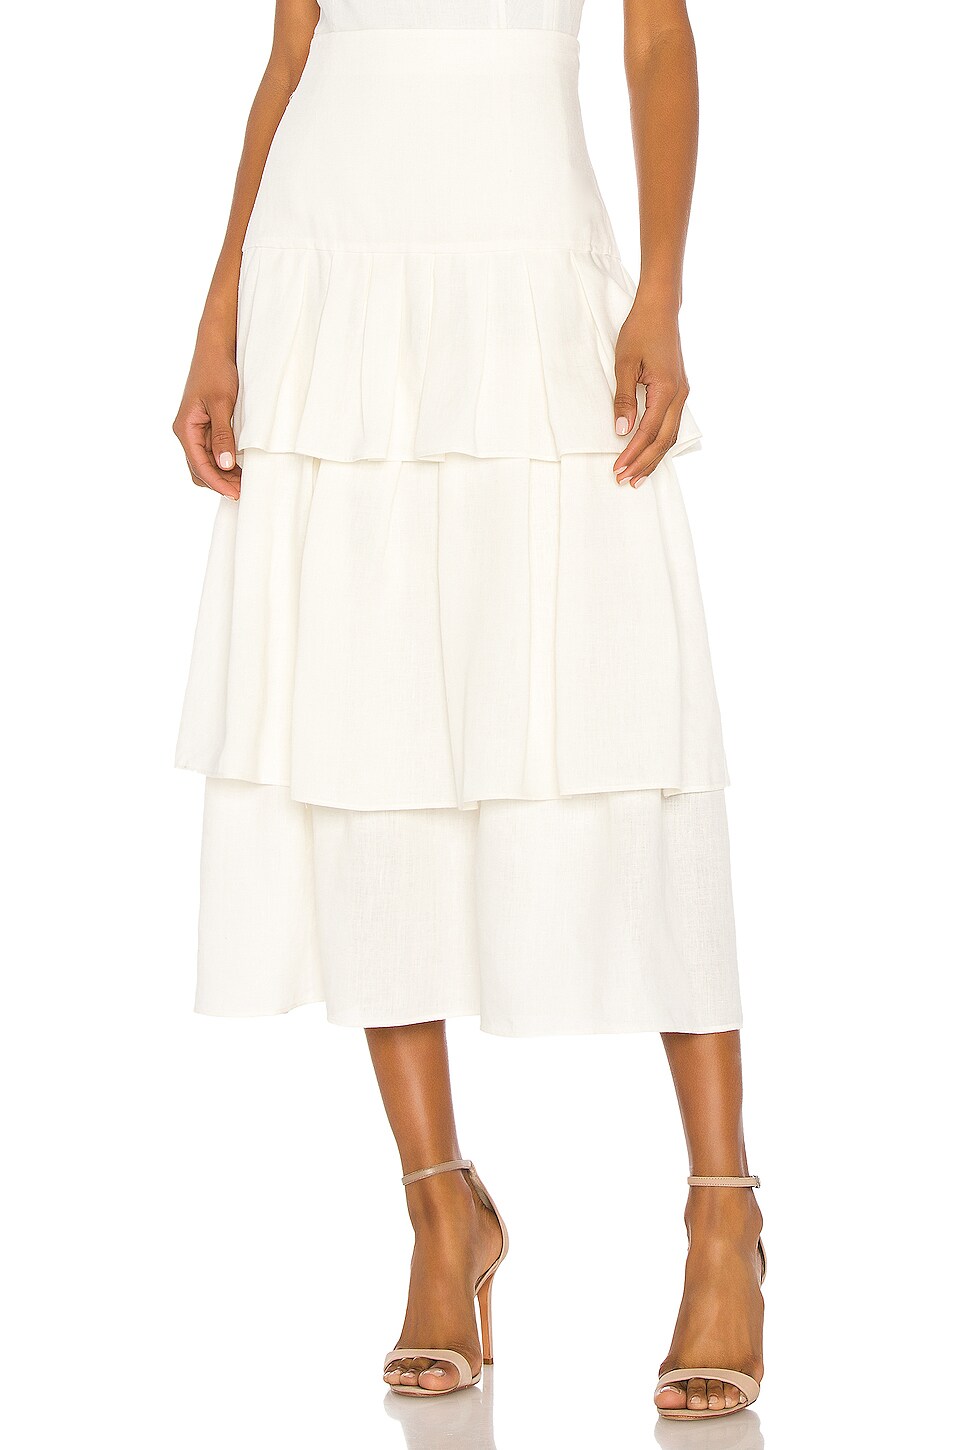 THEORY THEORY TIER RUFFLE SKIRT IN WHITE.,THEO-WQ39